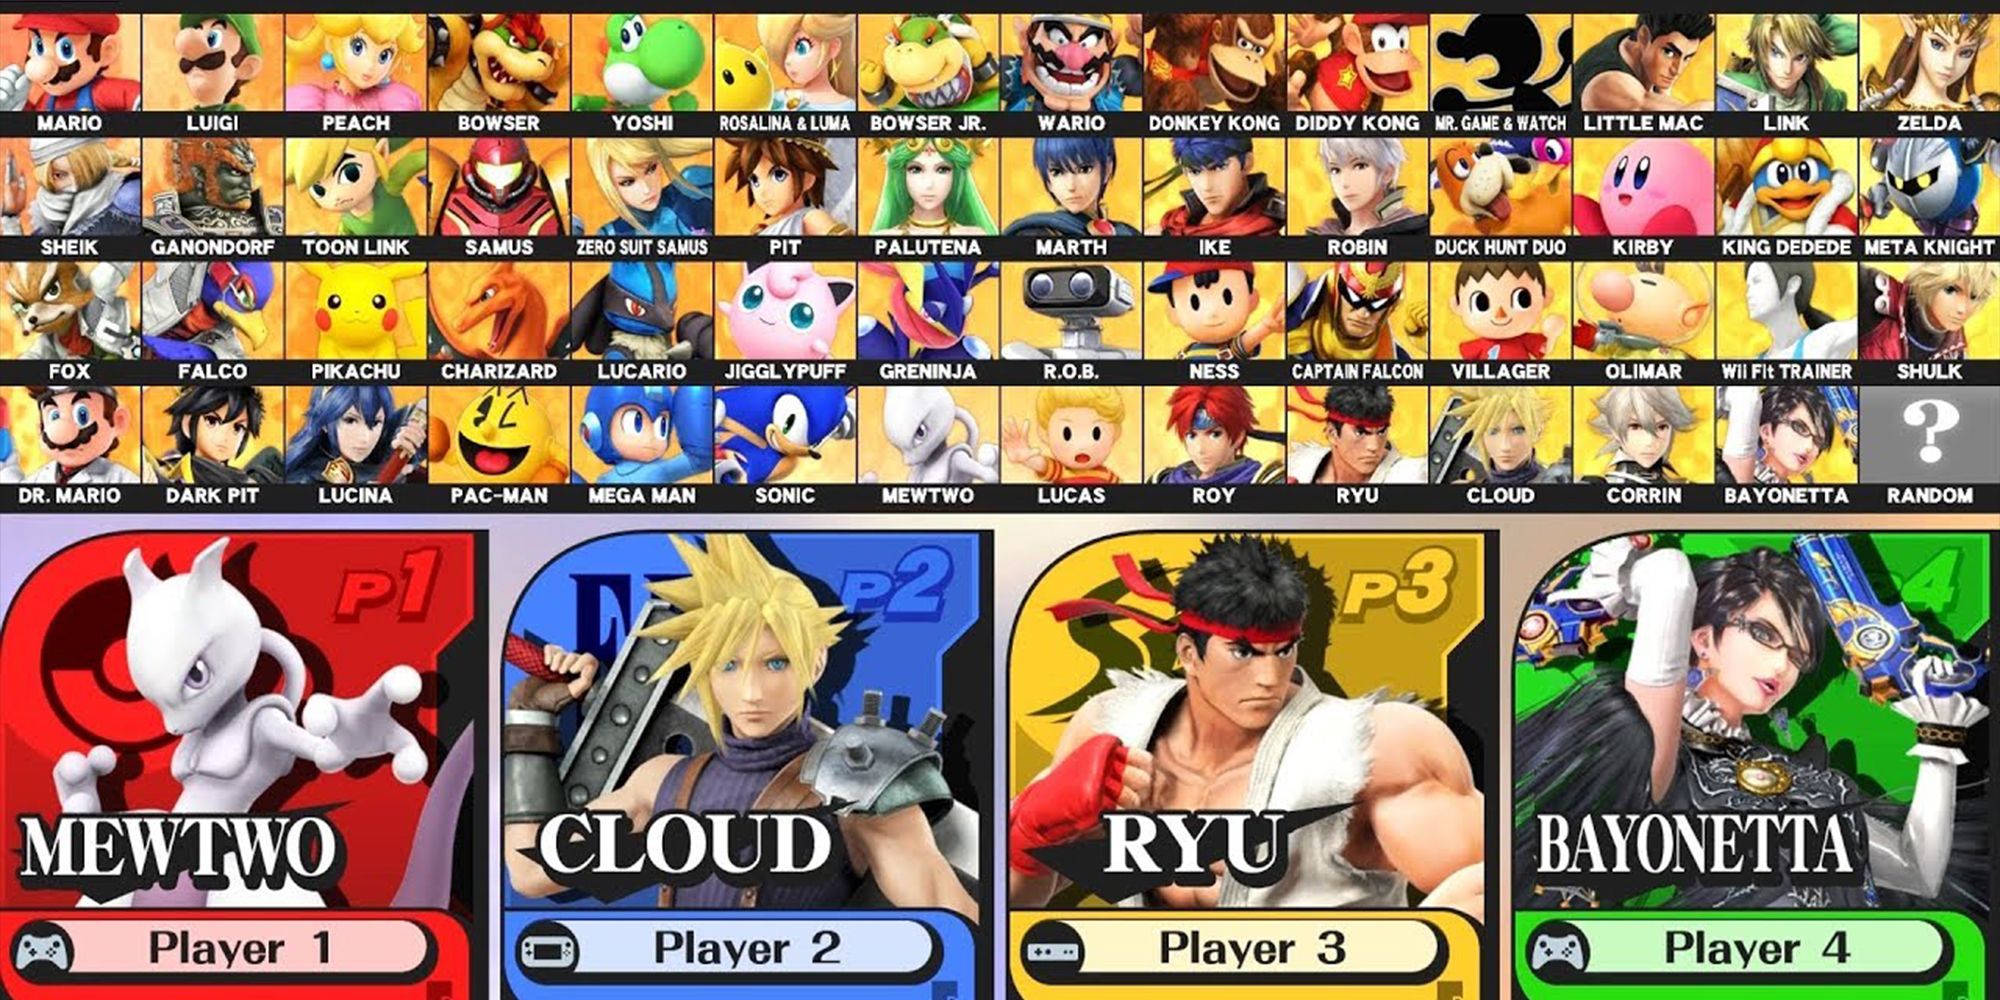 The Character Select Screen for Super Smash Bros. for Wii U